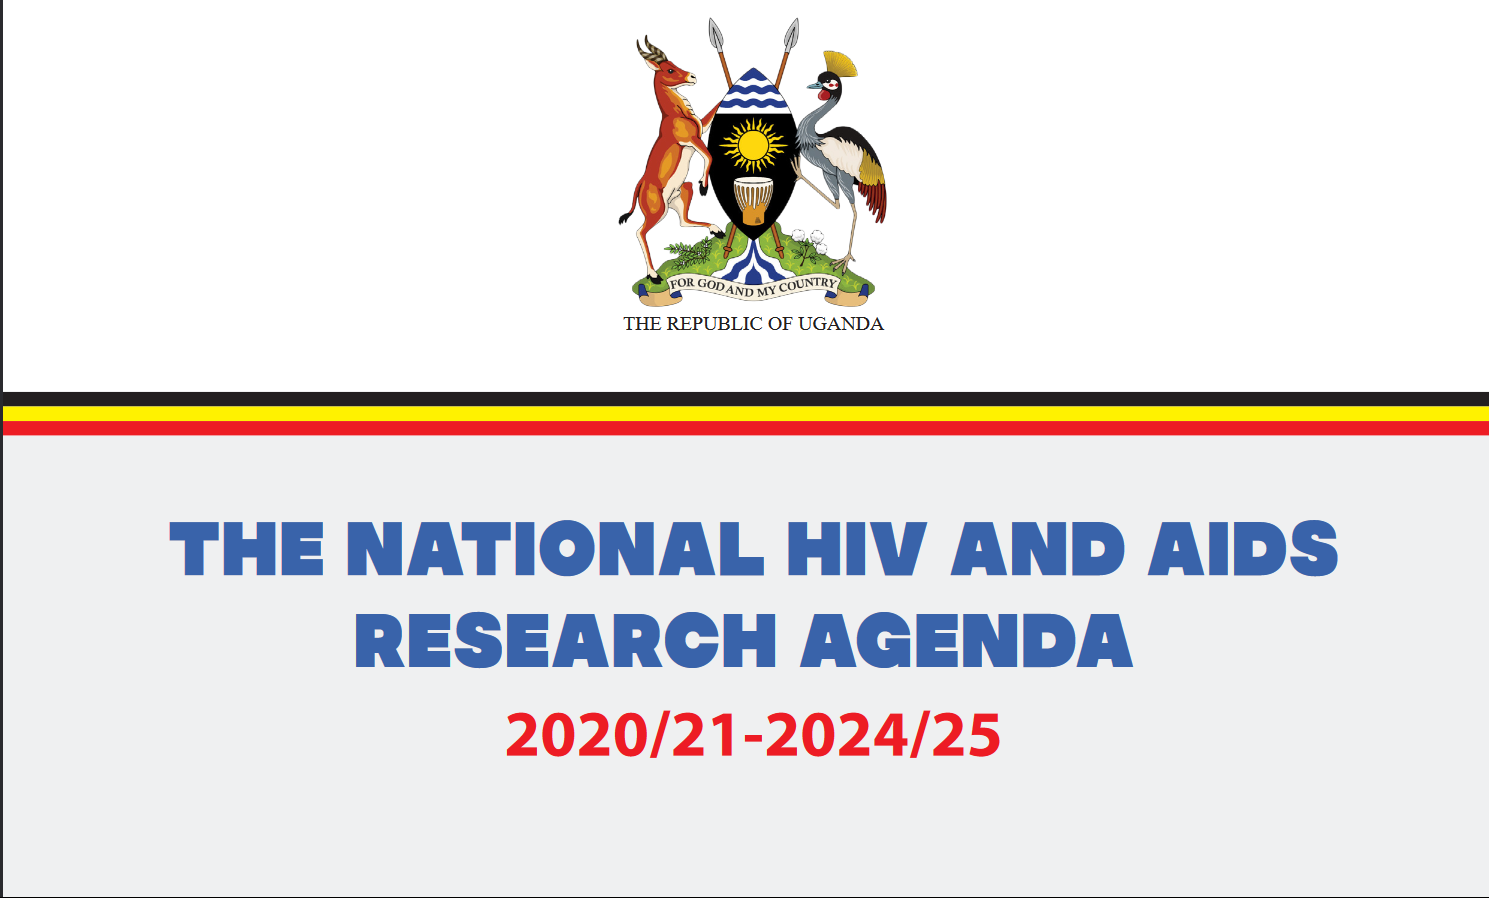 THE NATIONAL HIV AND AIDS  RESEARCH AGENDA  2020/21-2024/25